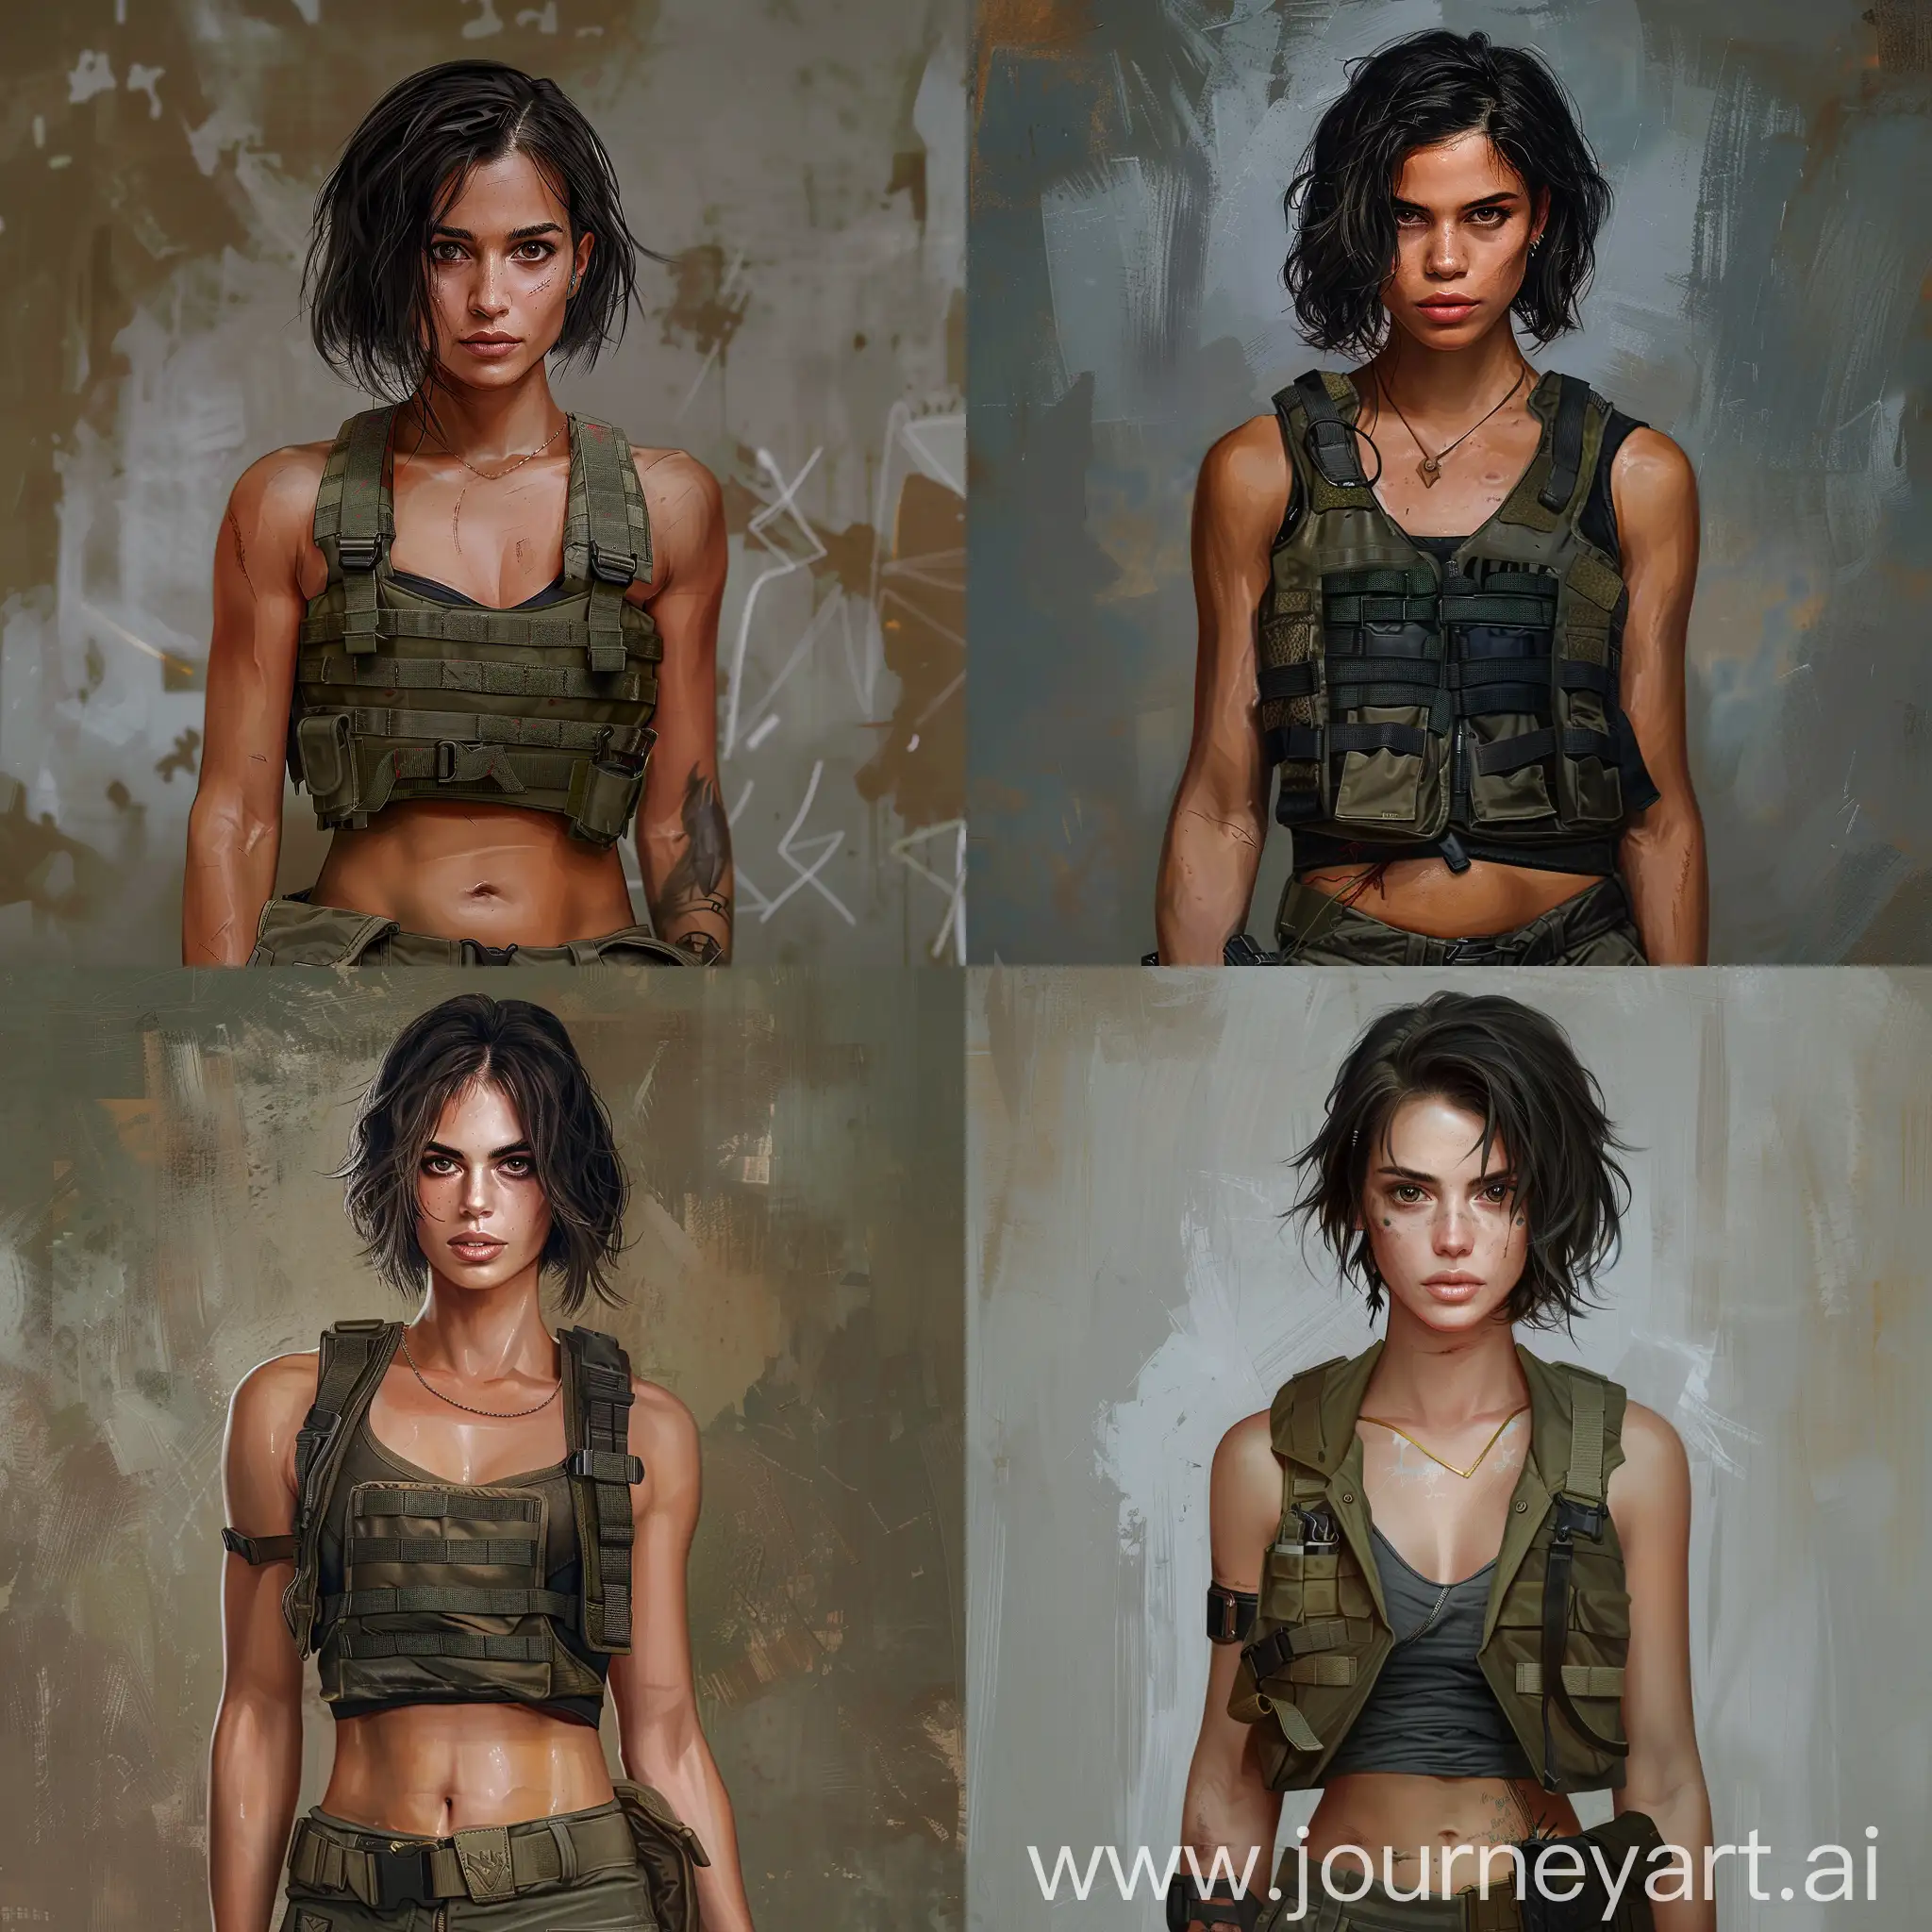 A photorealistic portrait of a woman in her mid-30s with short, dark hair and piercing brown eyes. She has a lean, athletic build and is wearing a tactical vest and cargo pants.